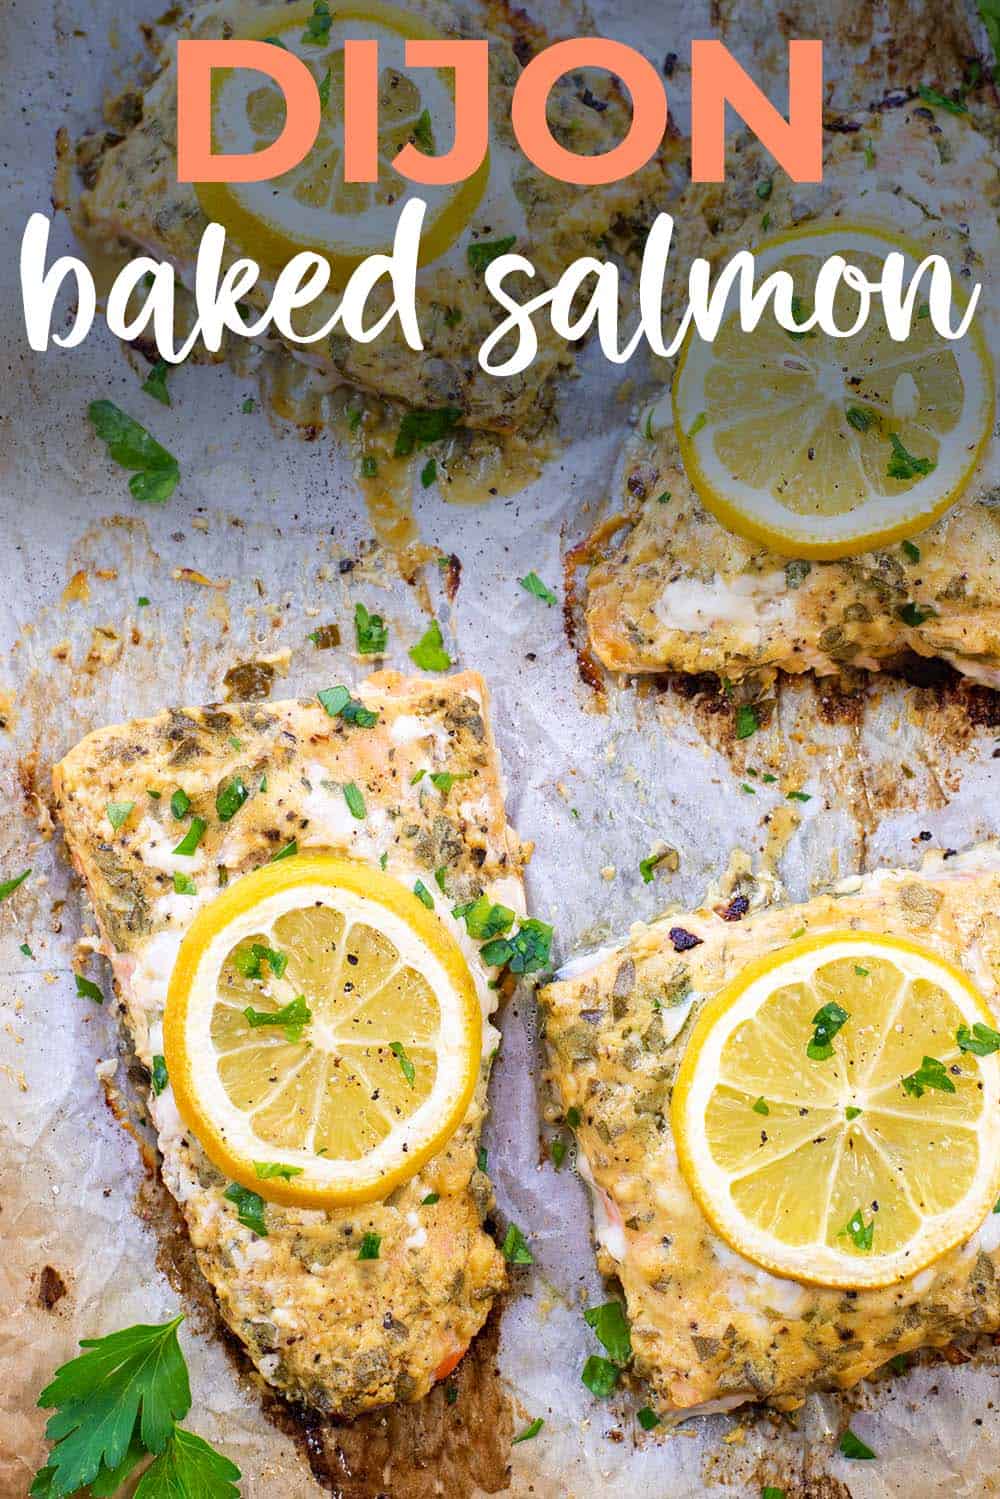 Dijon baked salmon on pan with text for Pinterest.